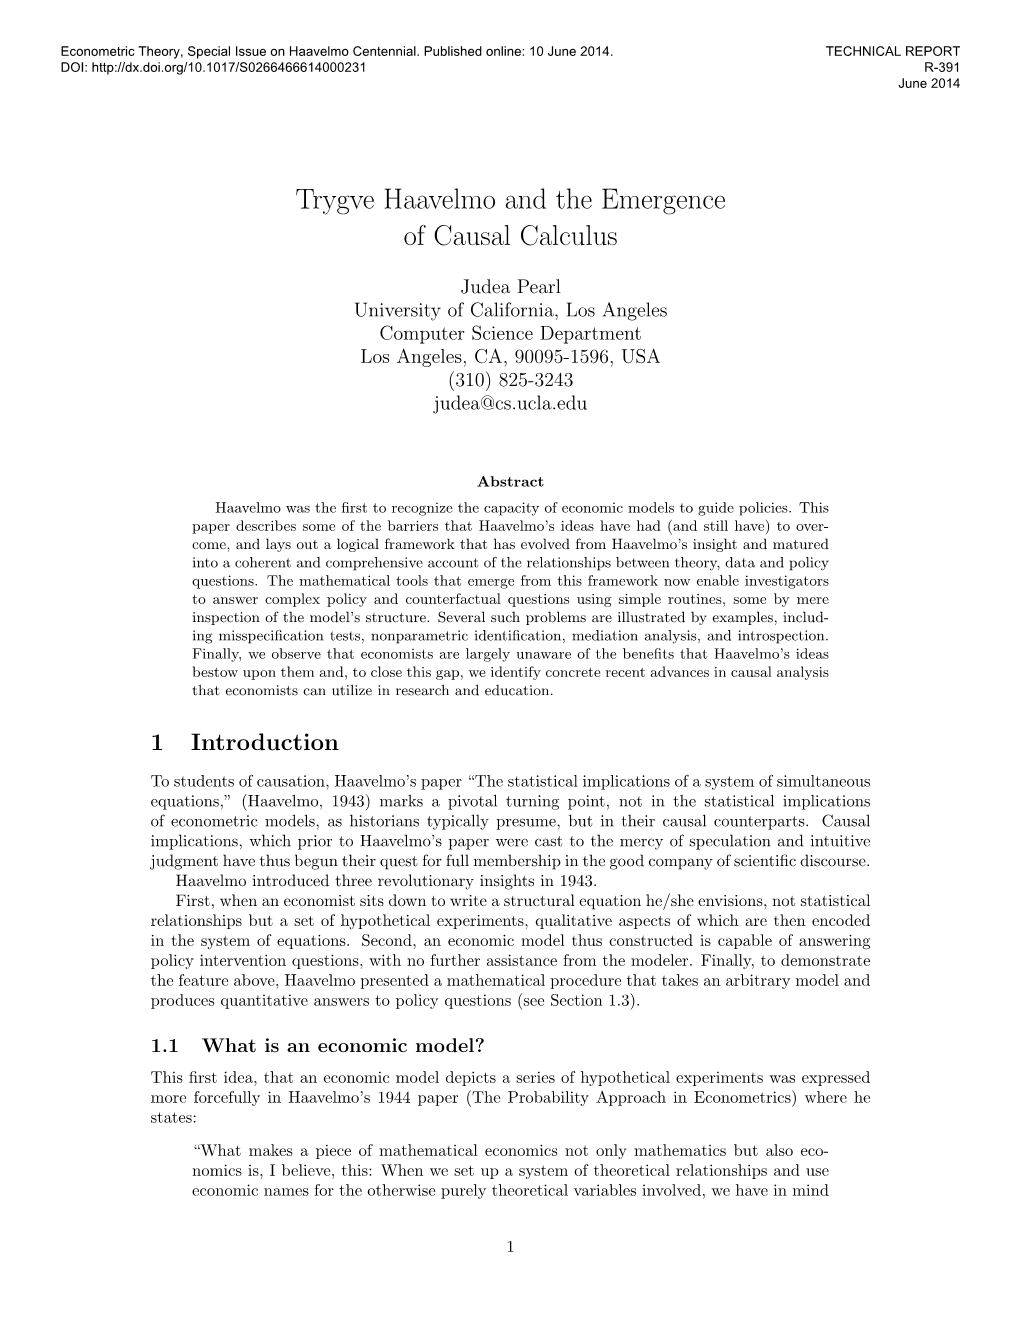 Trygve Haavelmo and the Emergence of Causal Calculus